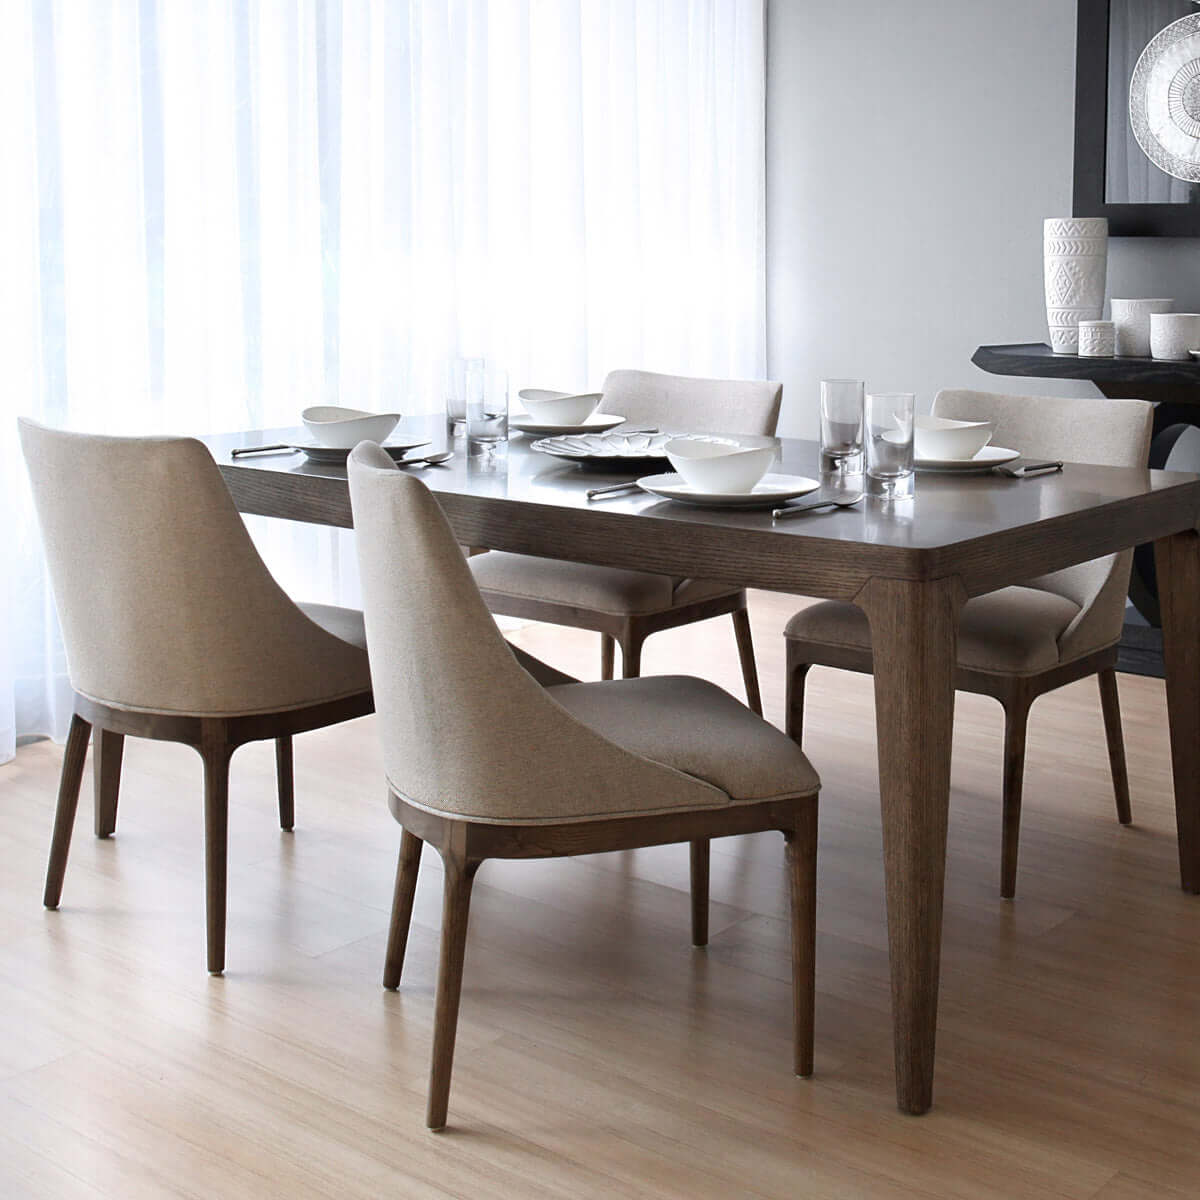 contemporary dining chair with straight wooden legs and a low backrest dining table view